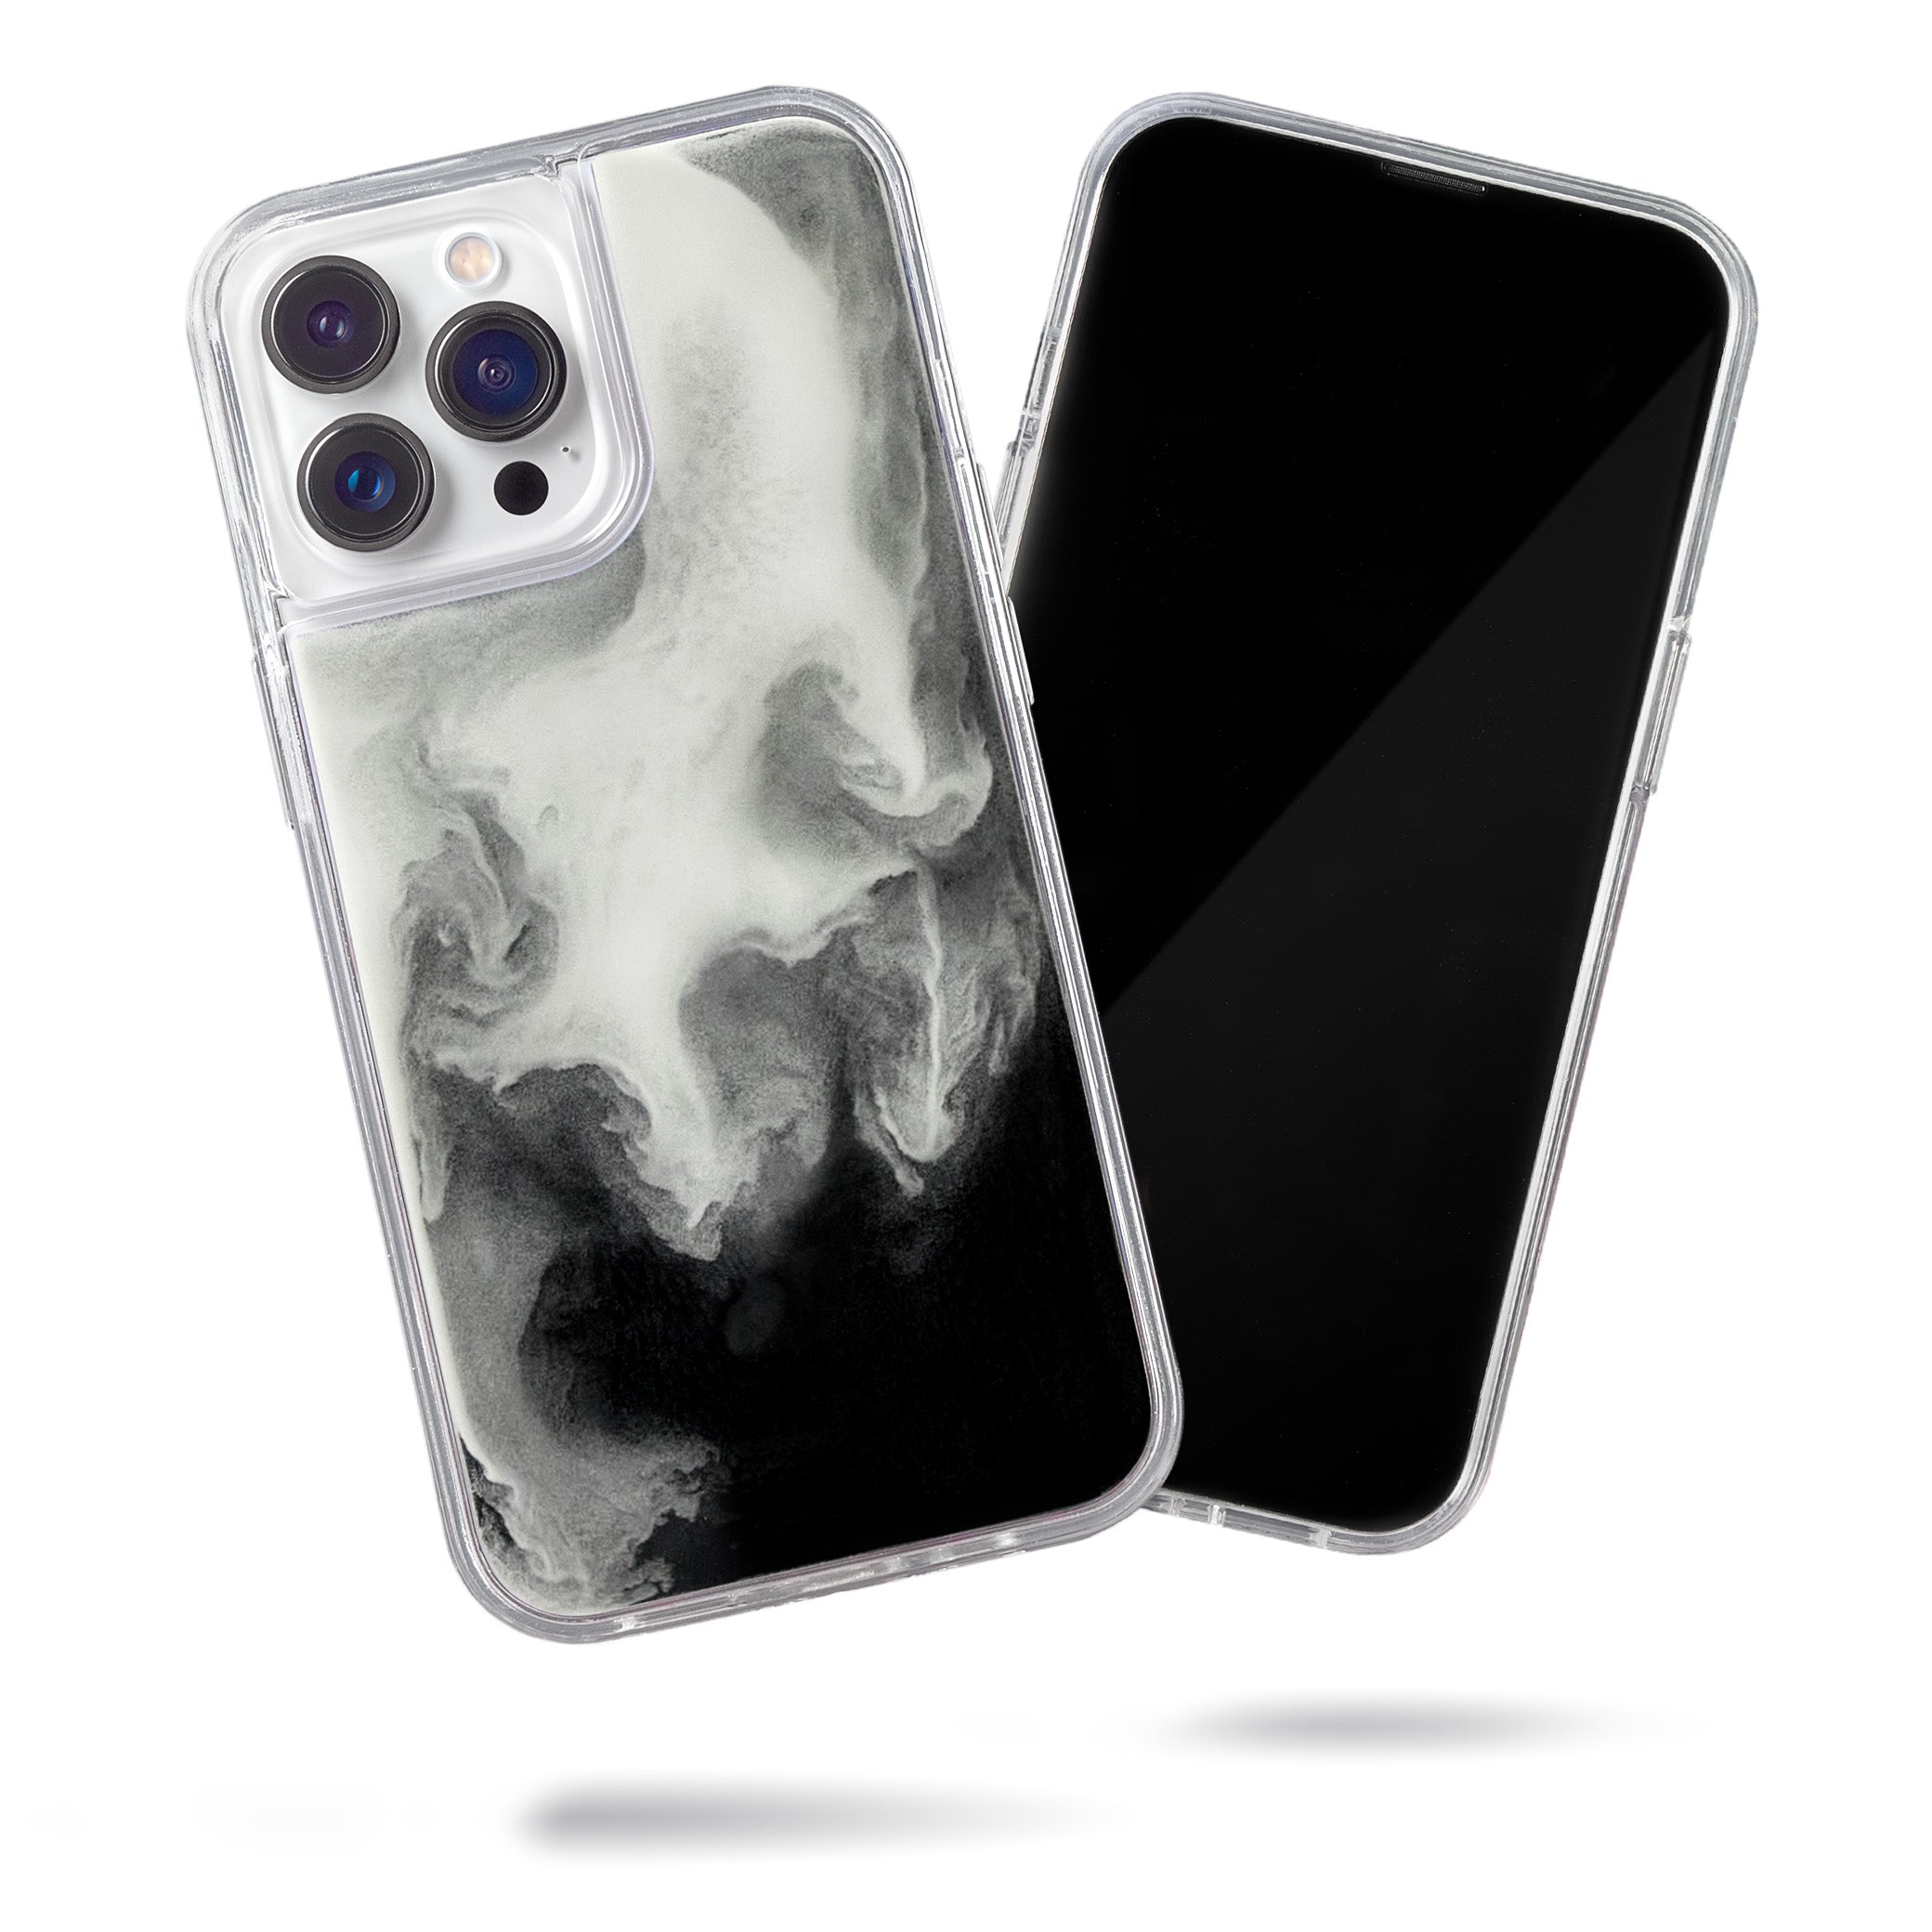 Neon Sand Case for iPhone 13 Pro Max - Hi Contrast Black n White